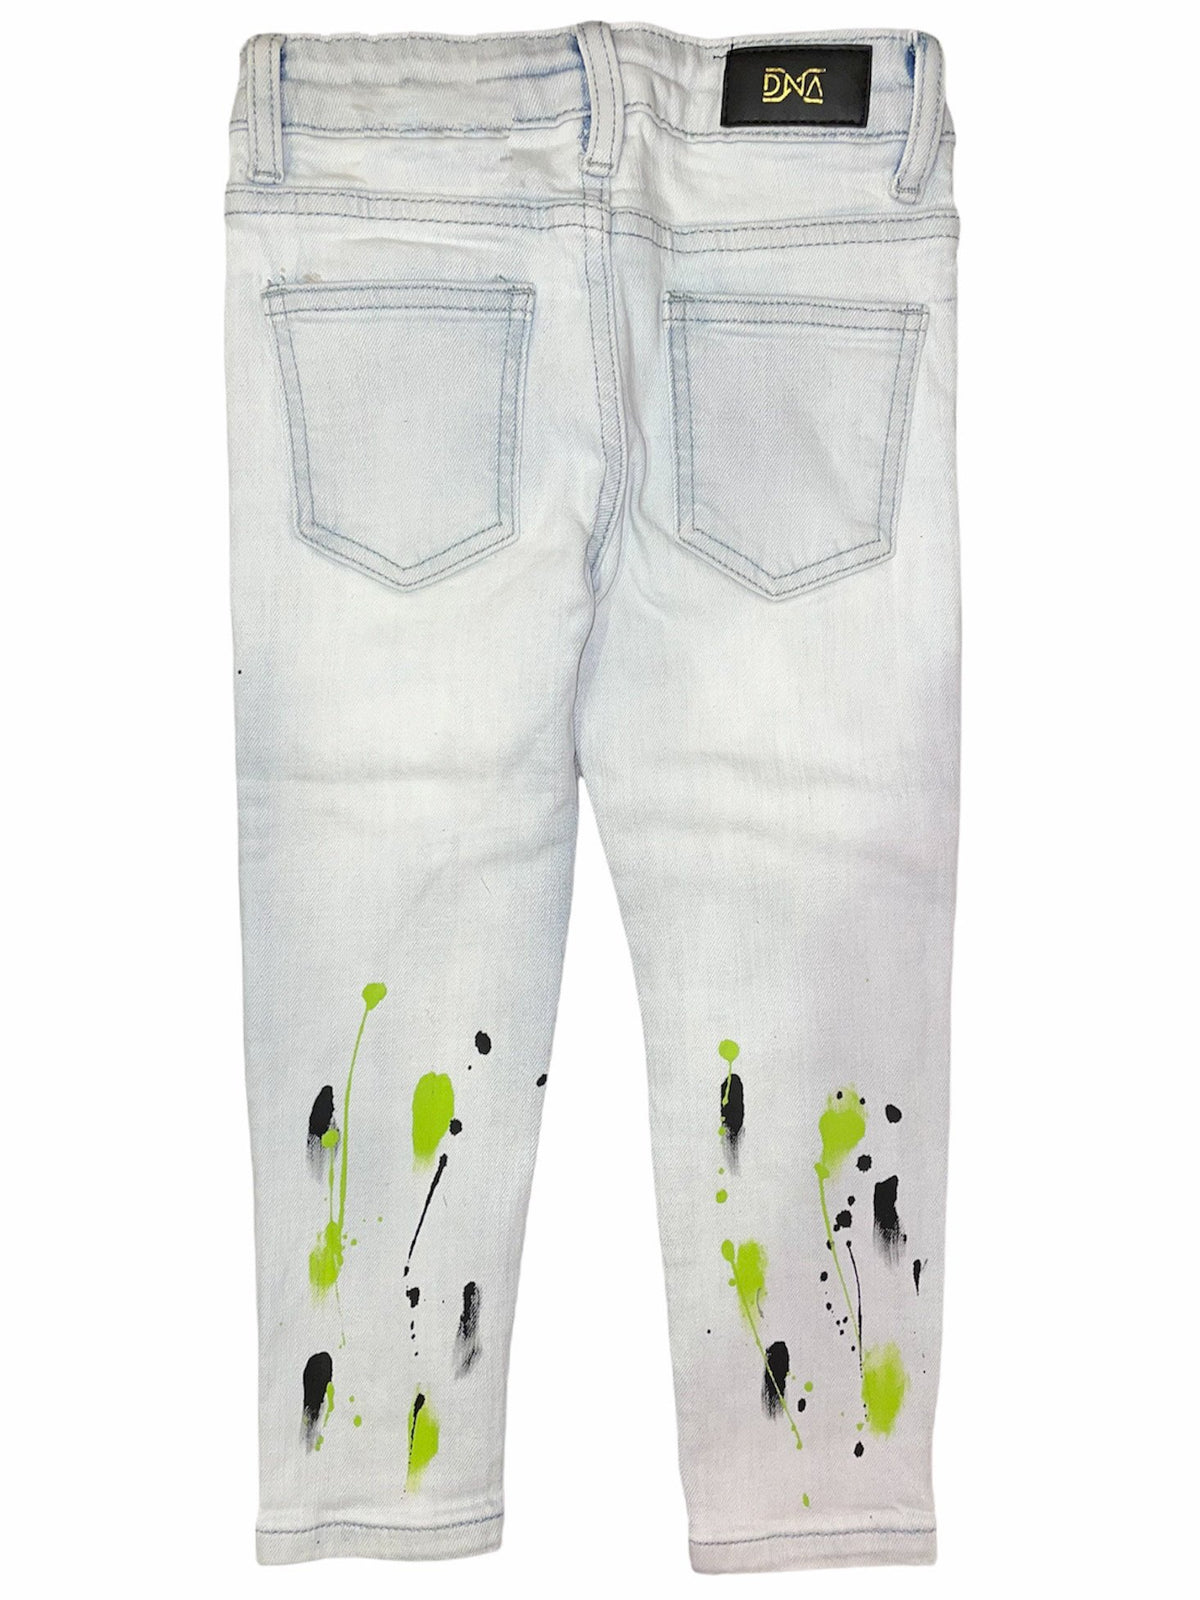 Kids Dna Stone & Paint Jeans-Green/Black